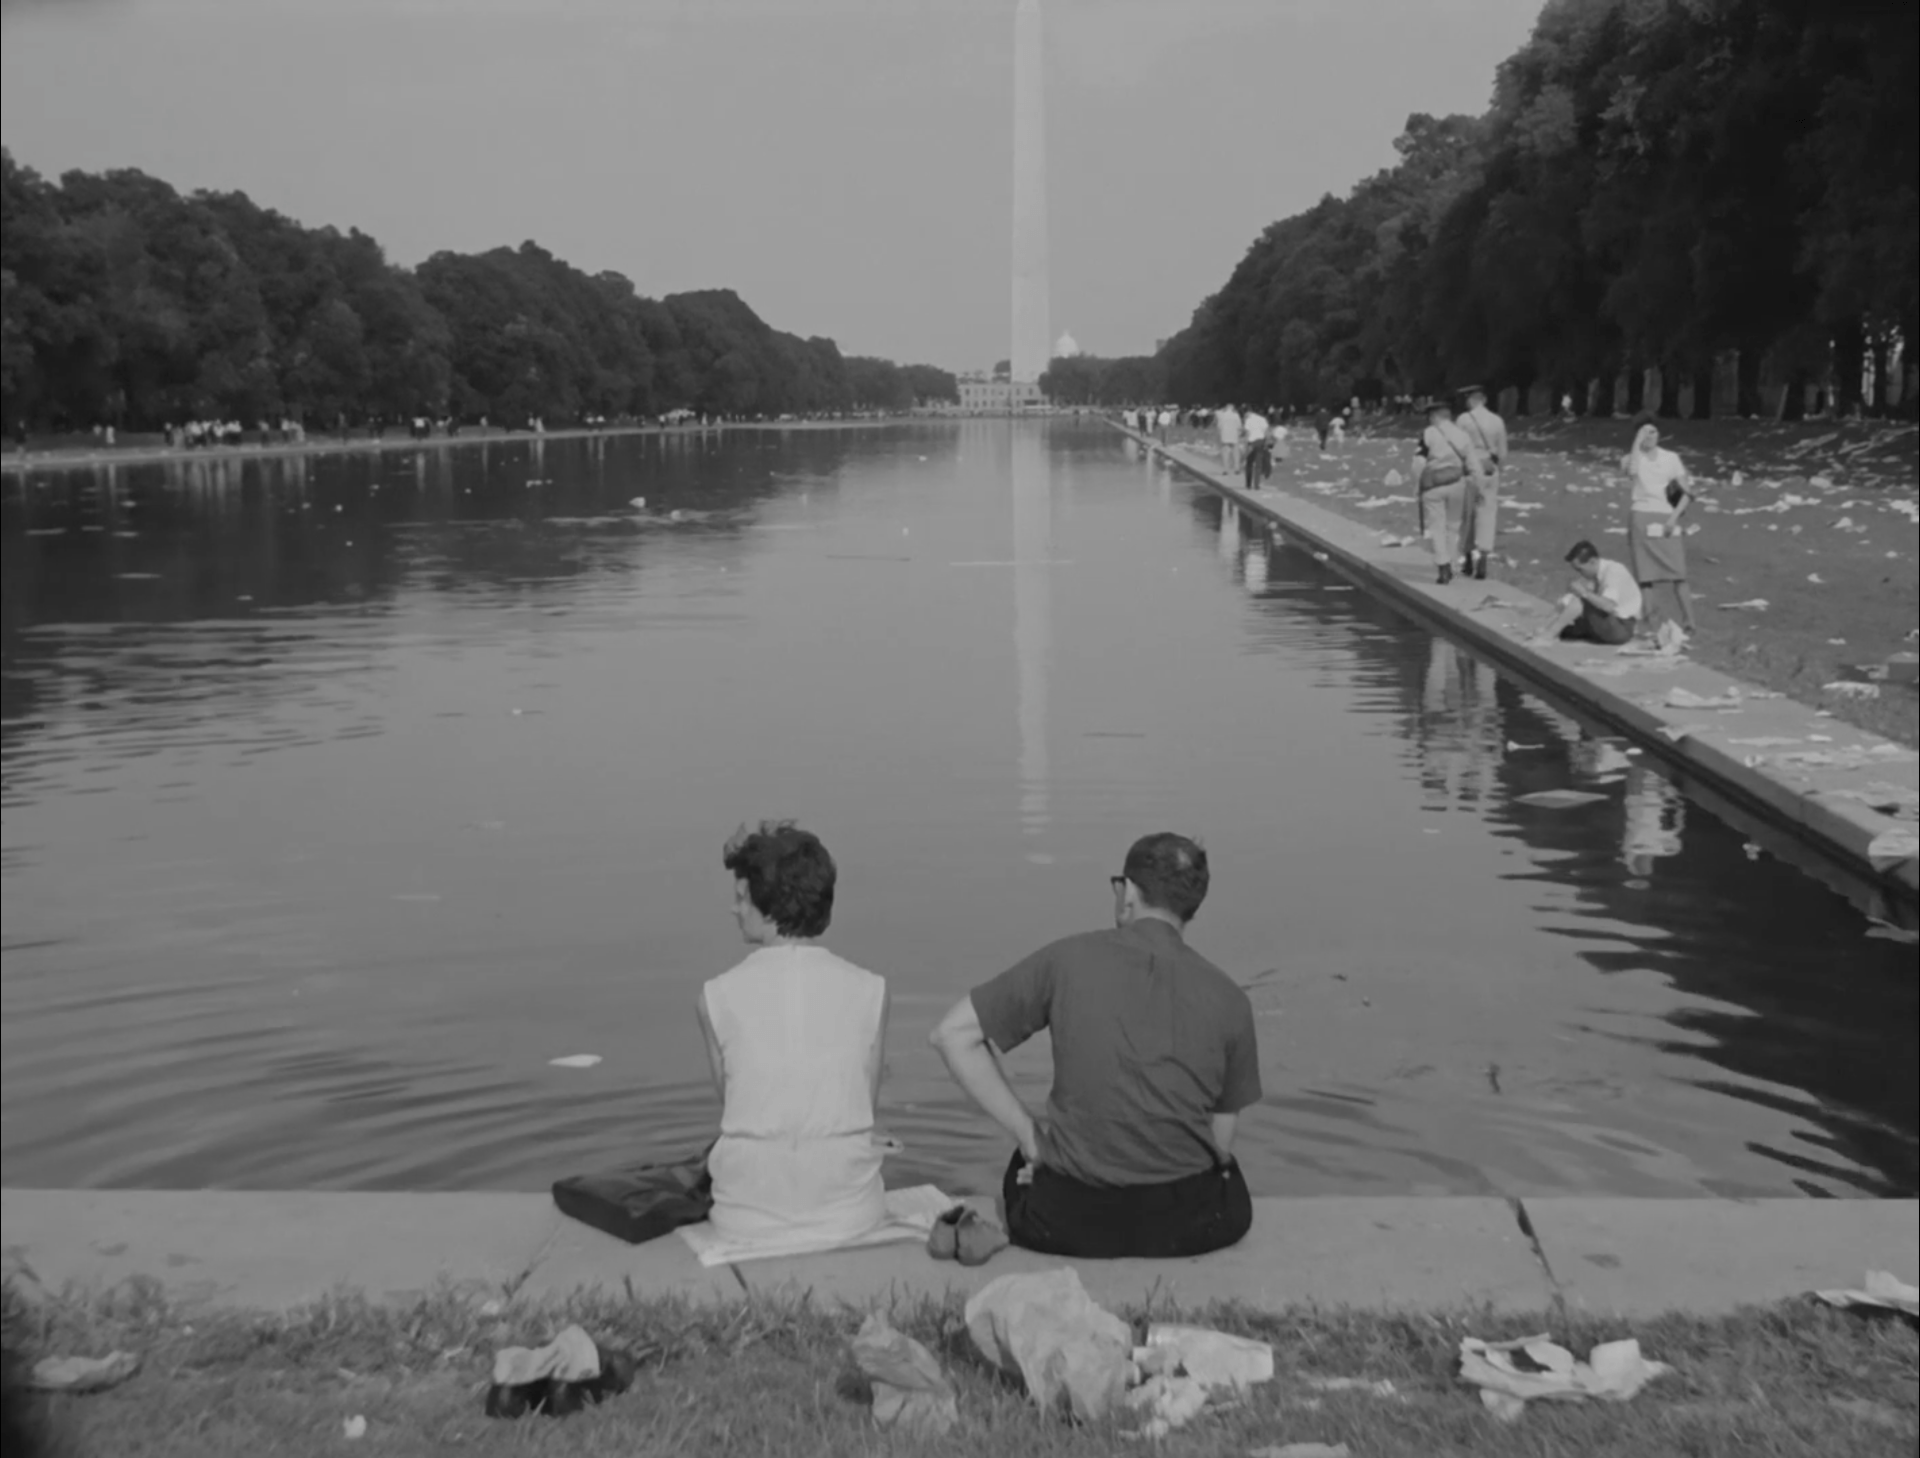 People sit on the edge of the reflecting pool on the National Mall (Washington, DC), facing the Washington Monument. There is litter on the ground left after the March on Washington.